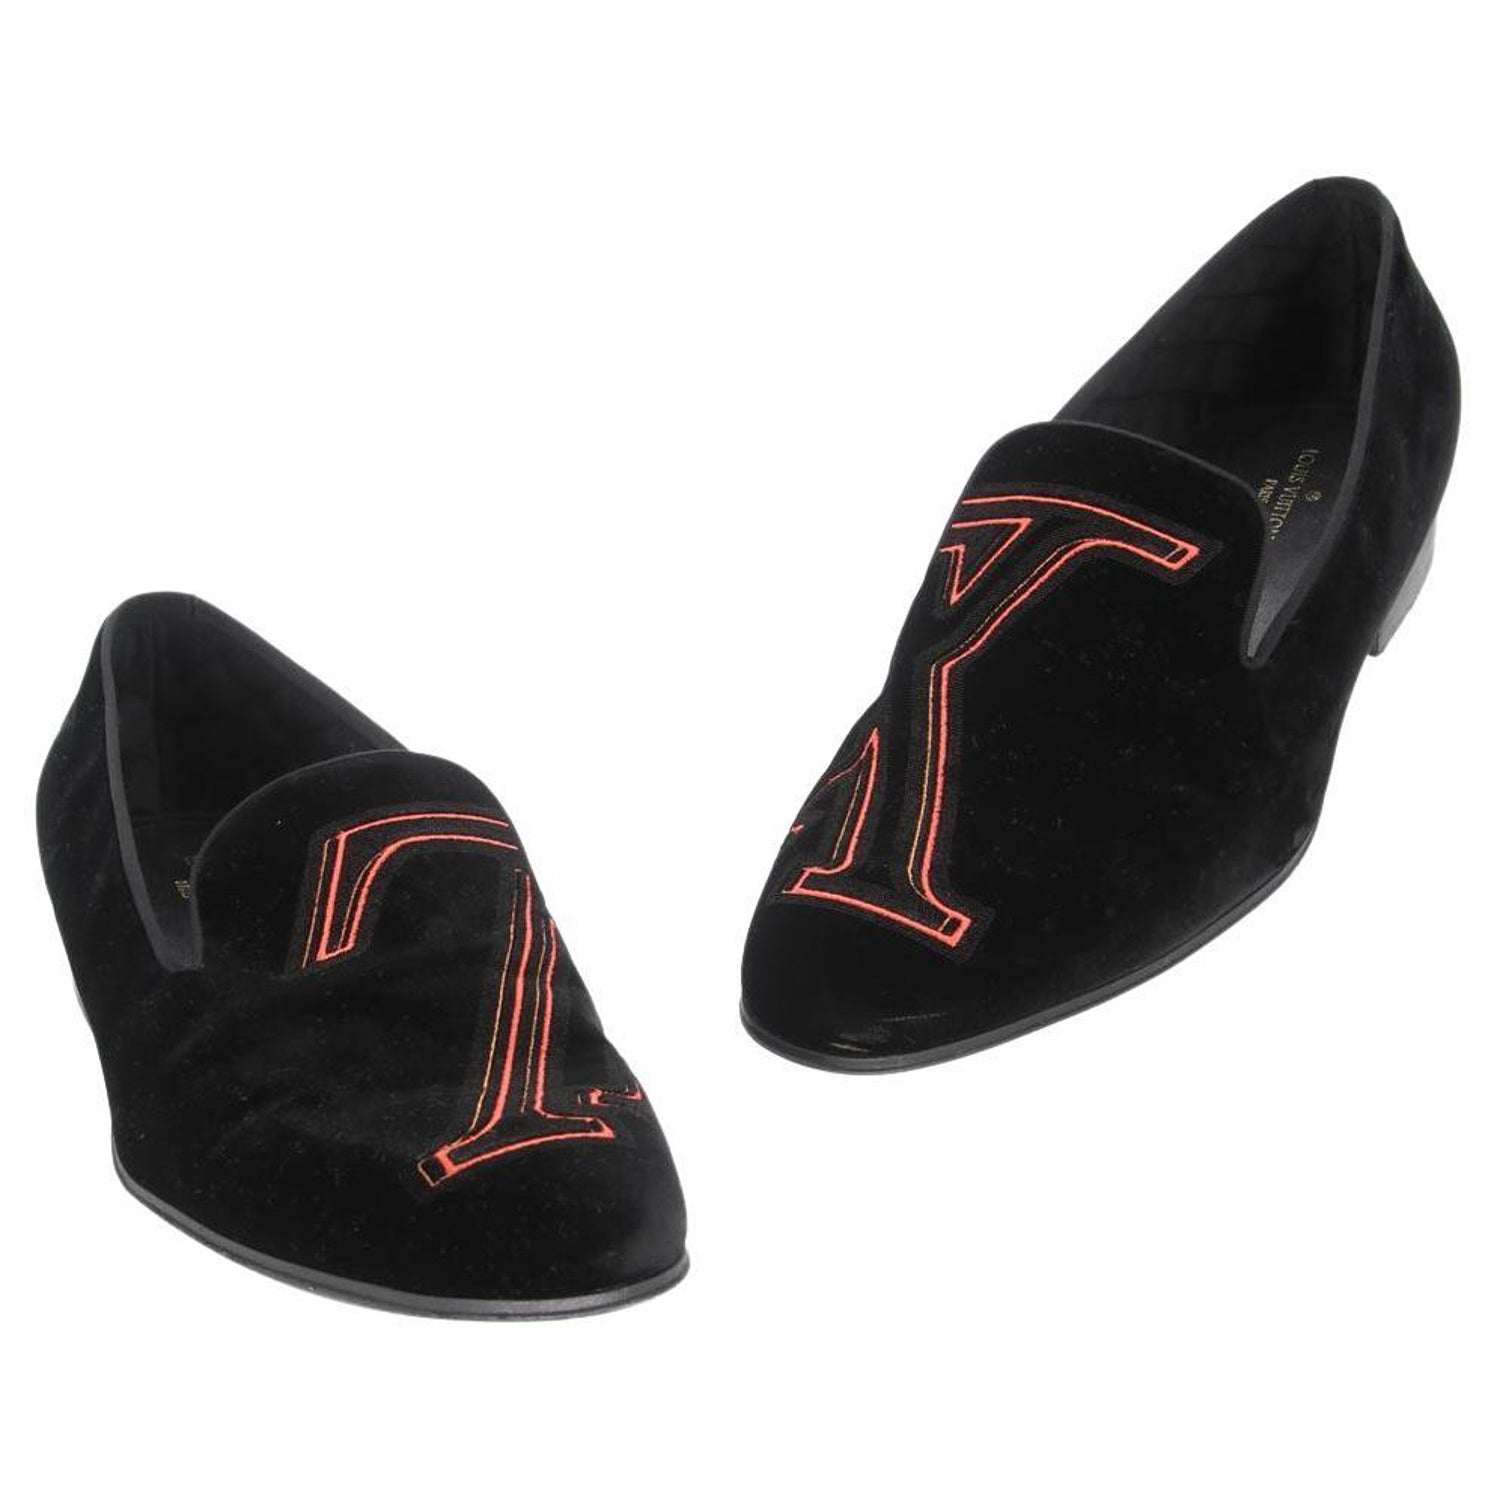 Louis Vuitton Slippers Mink - For Sale on 1stDibs